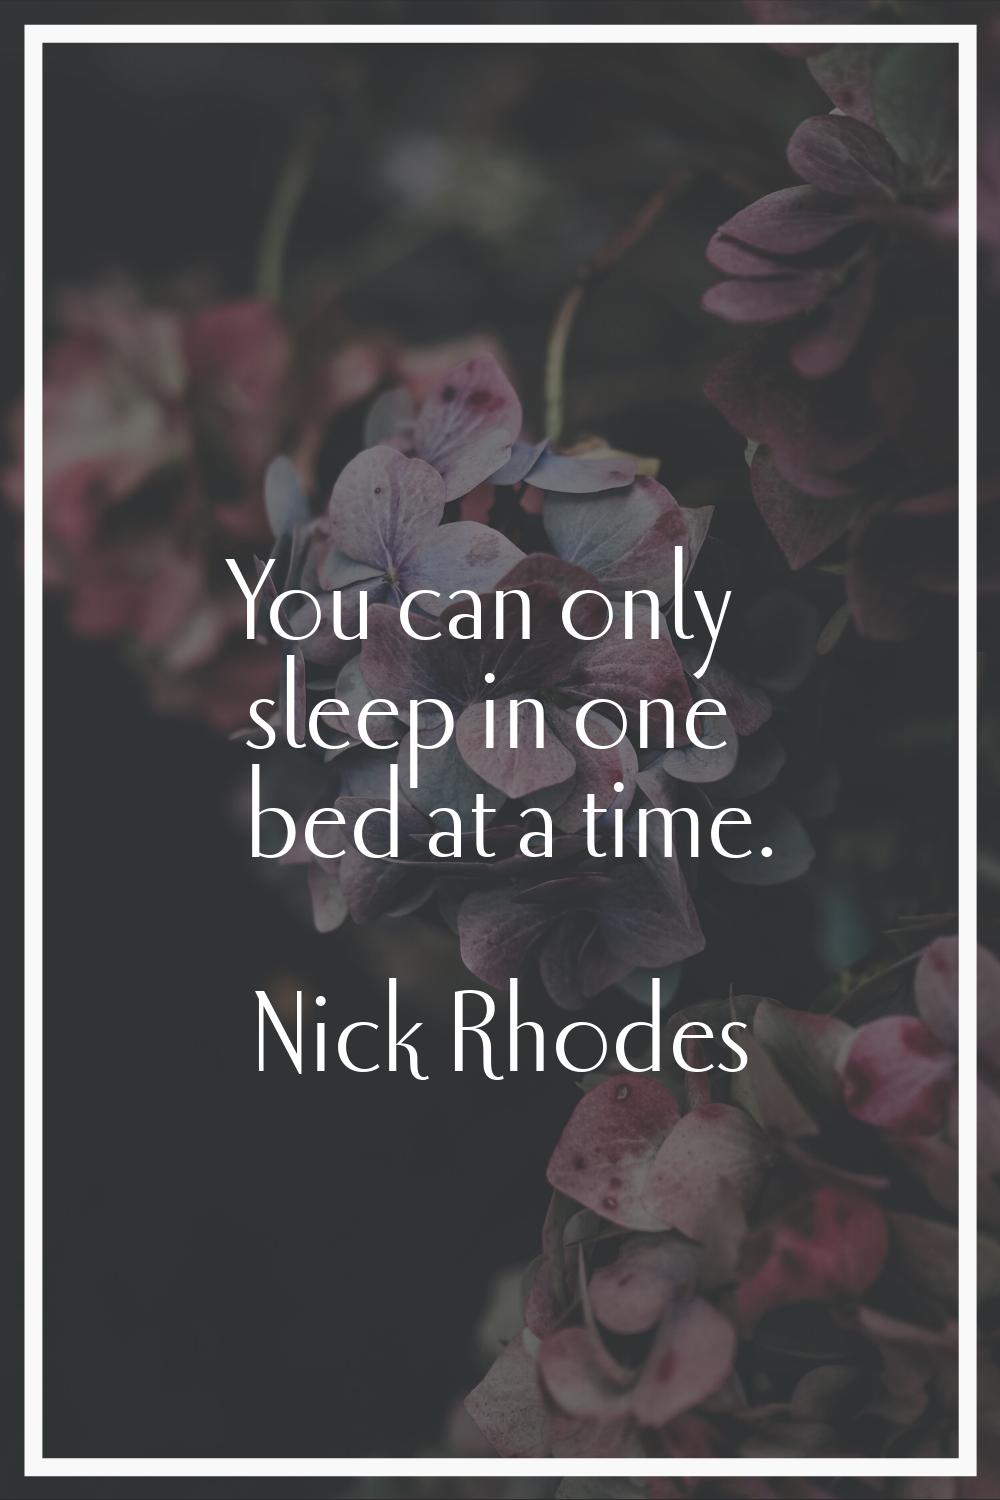 You can only sleep in one bed at a time.